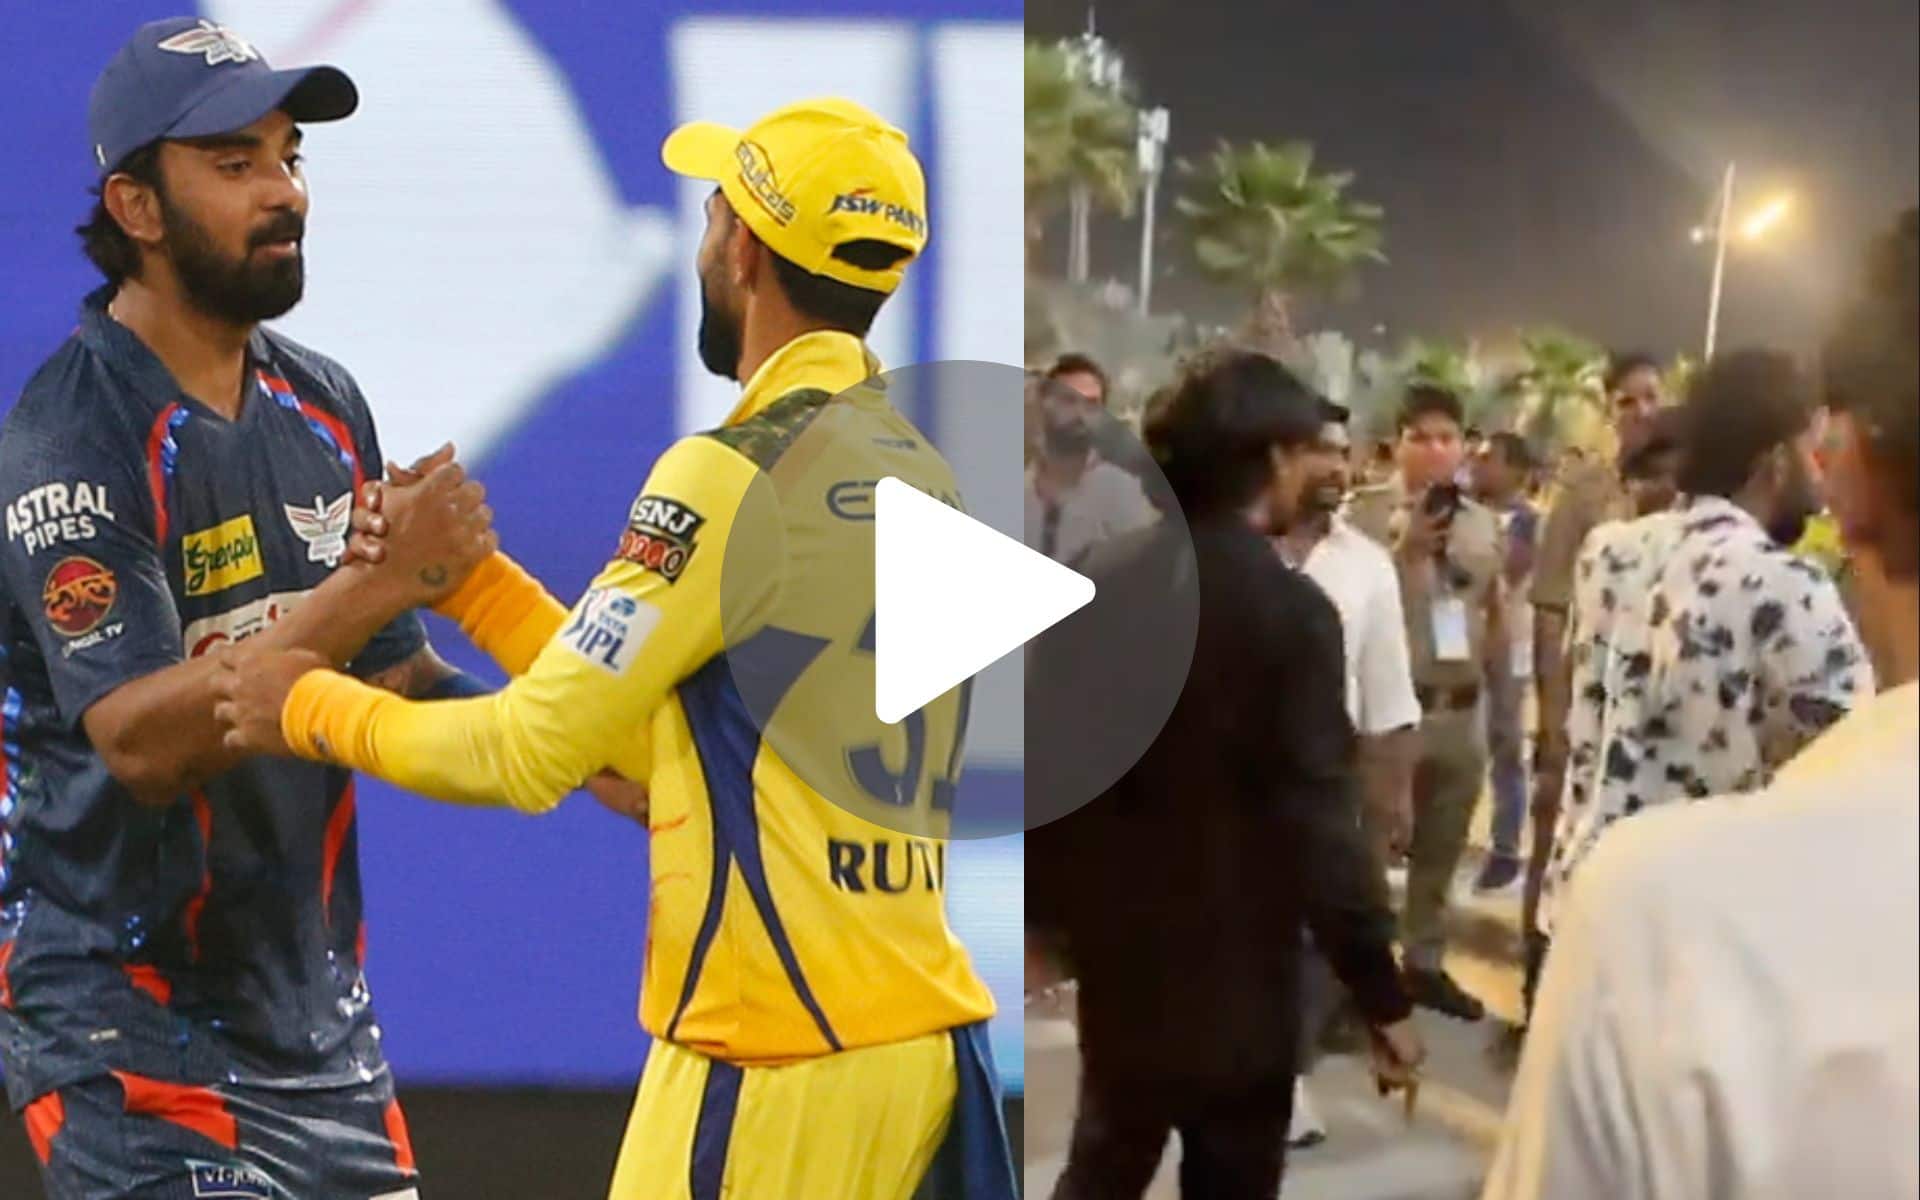 [Watch] Fan Caught By Police Trying To Steal Match-Ball In LSG Vs CSK, Video Goes Viral 